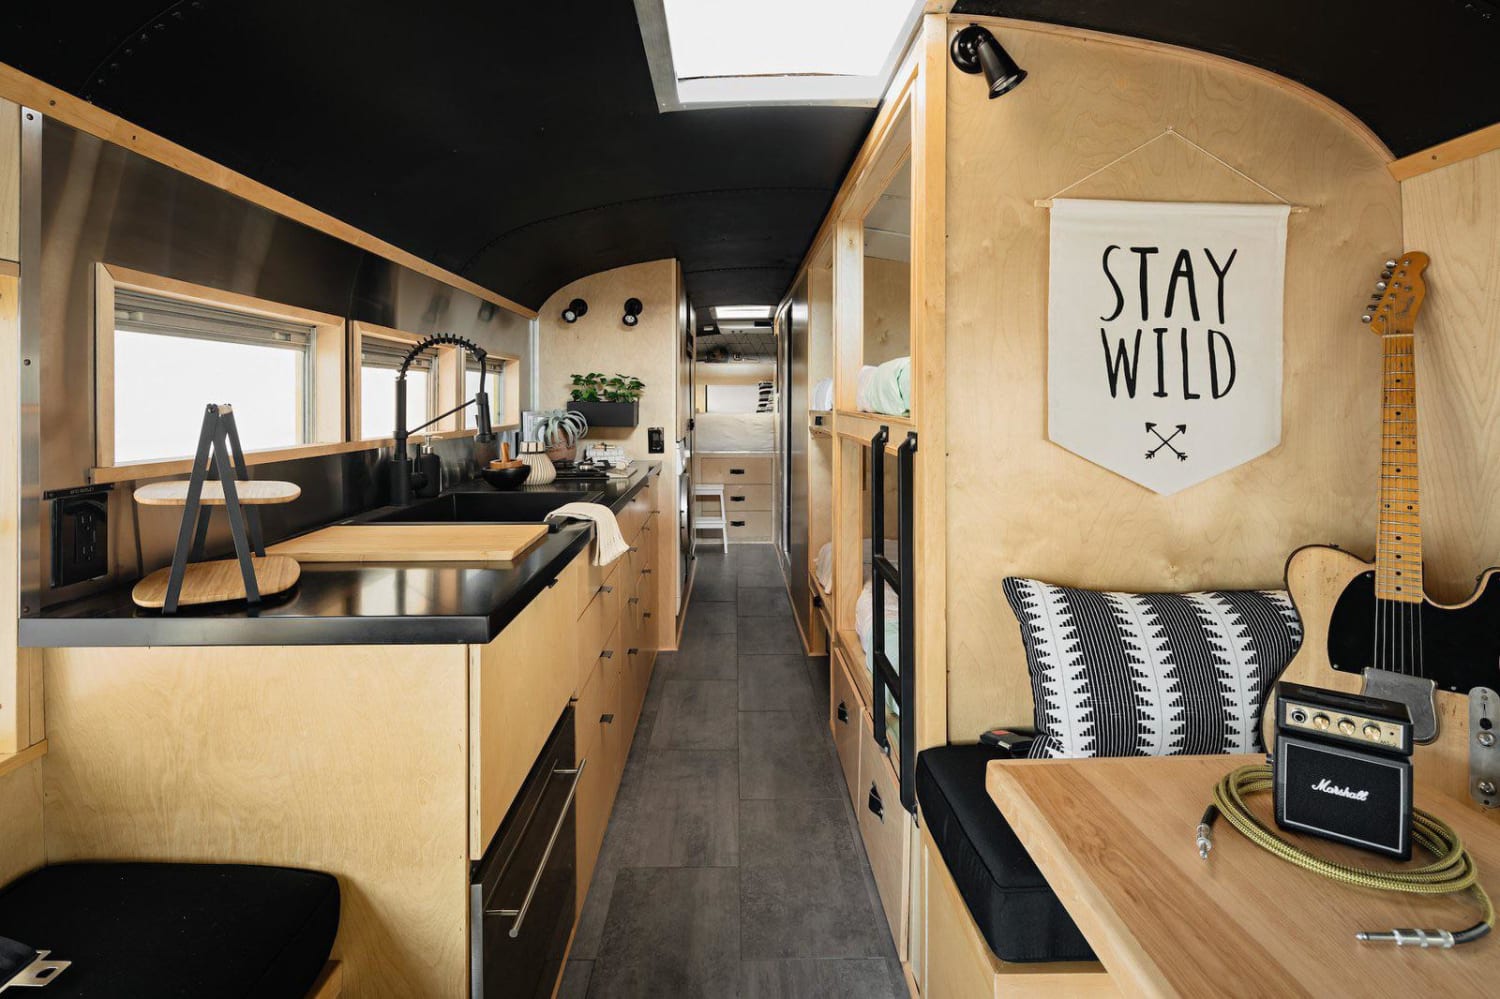 Take your cozy place wherever you go! (Scandinavian school bus conversion). Hopefully not a repost.